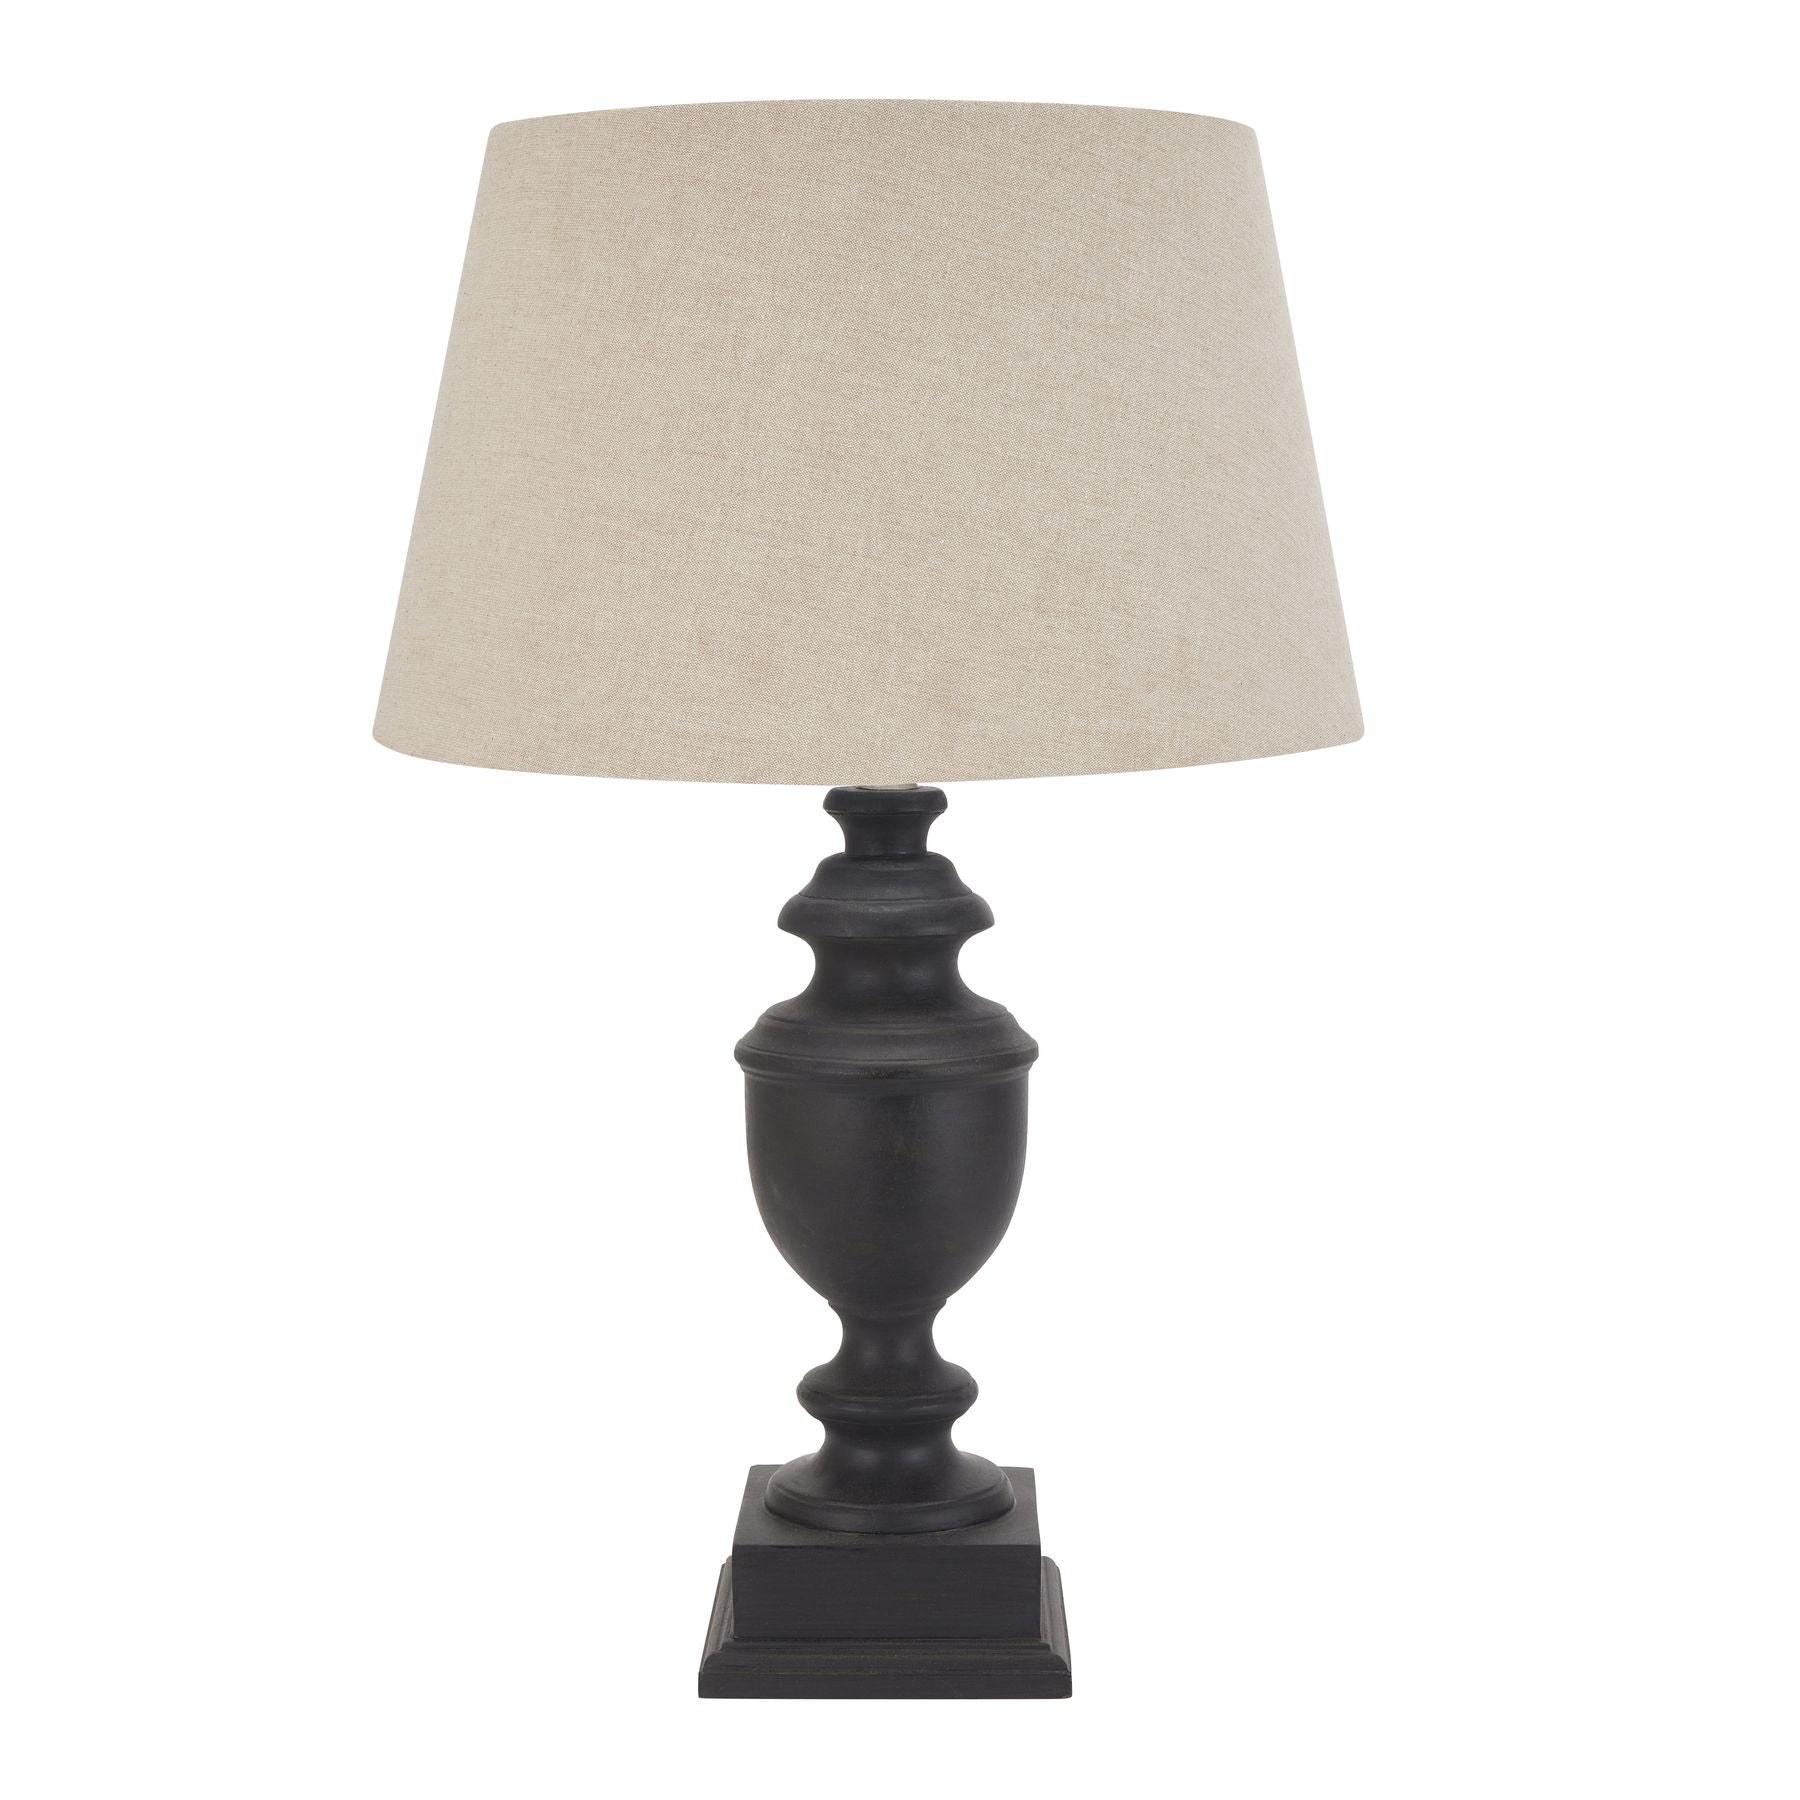 View Delaney Collection Grey Urn Lamp With Linen Shade information